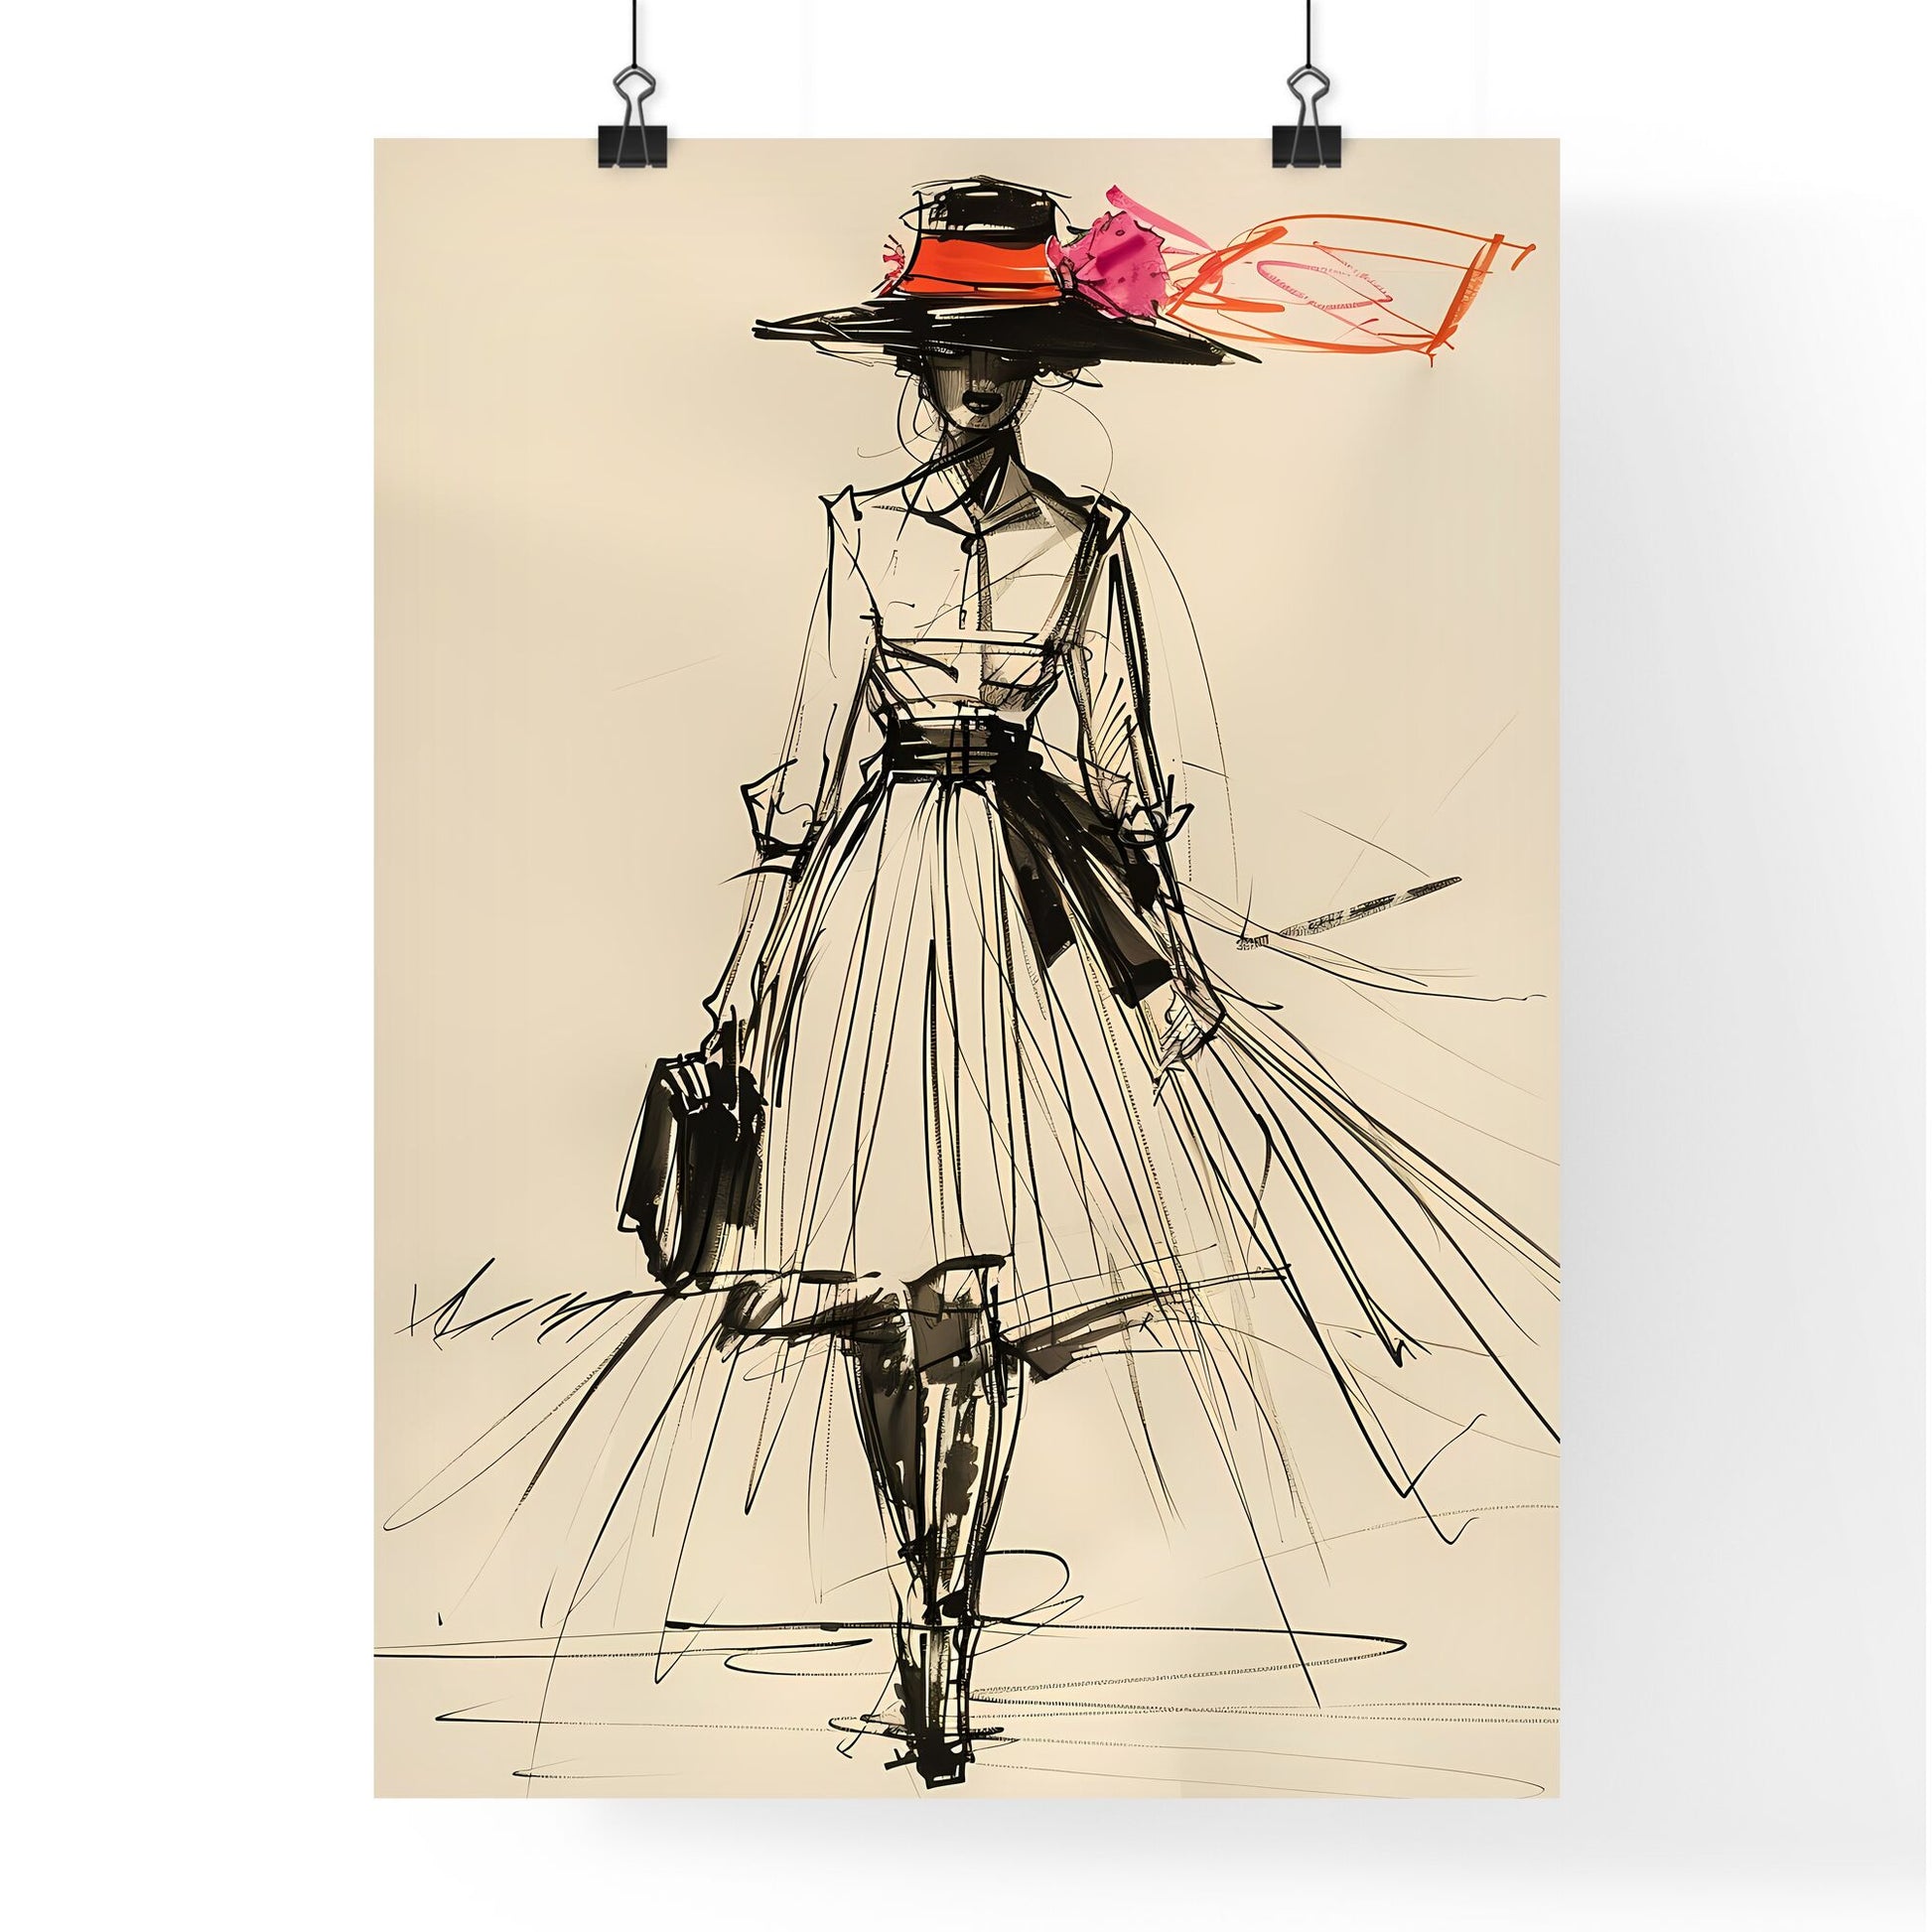 Artistic Fashion Sketch: Hand-Painted Woman's Portrait with Vibrant Dress and Hat Default Title